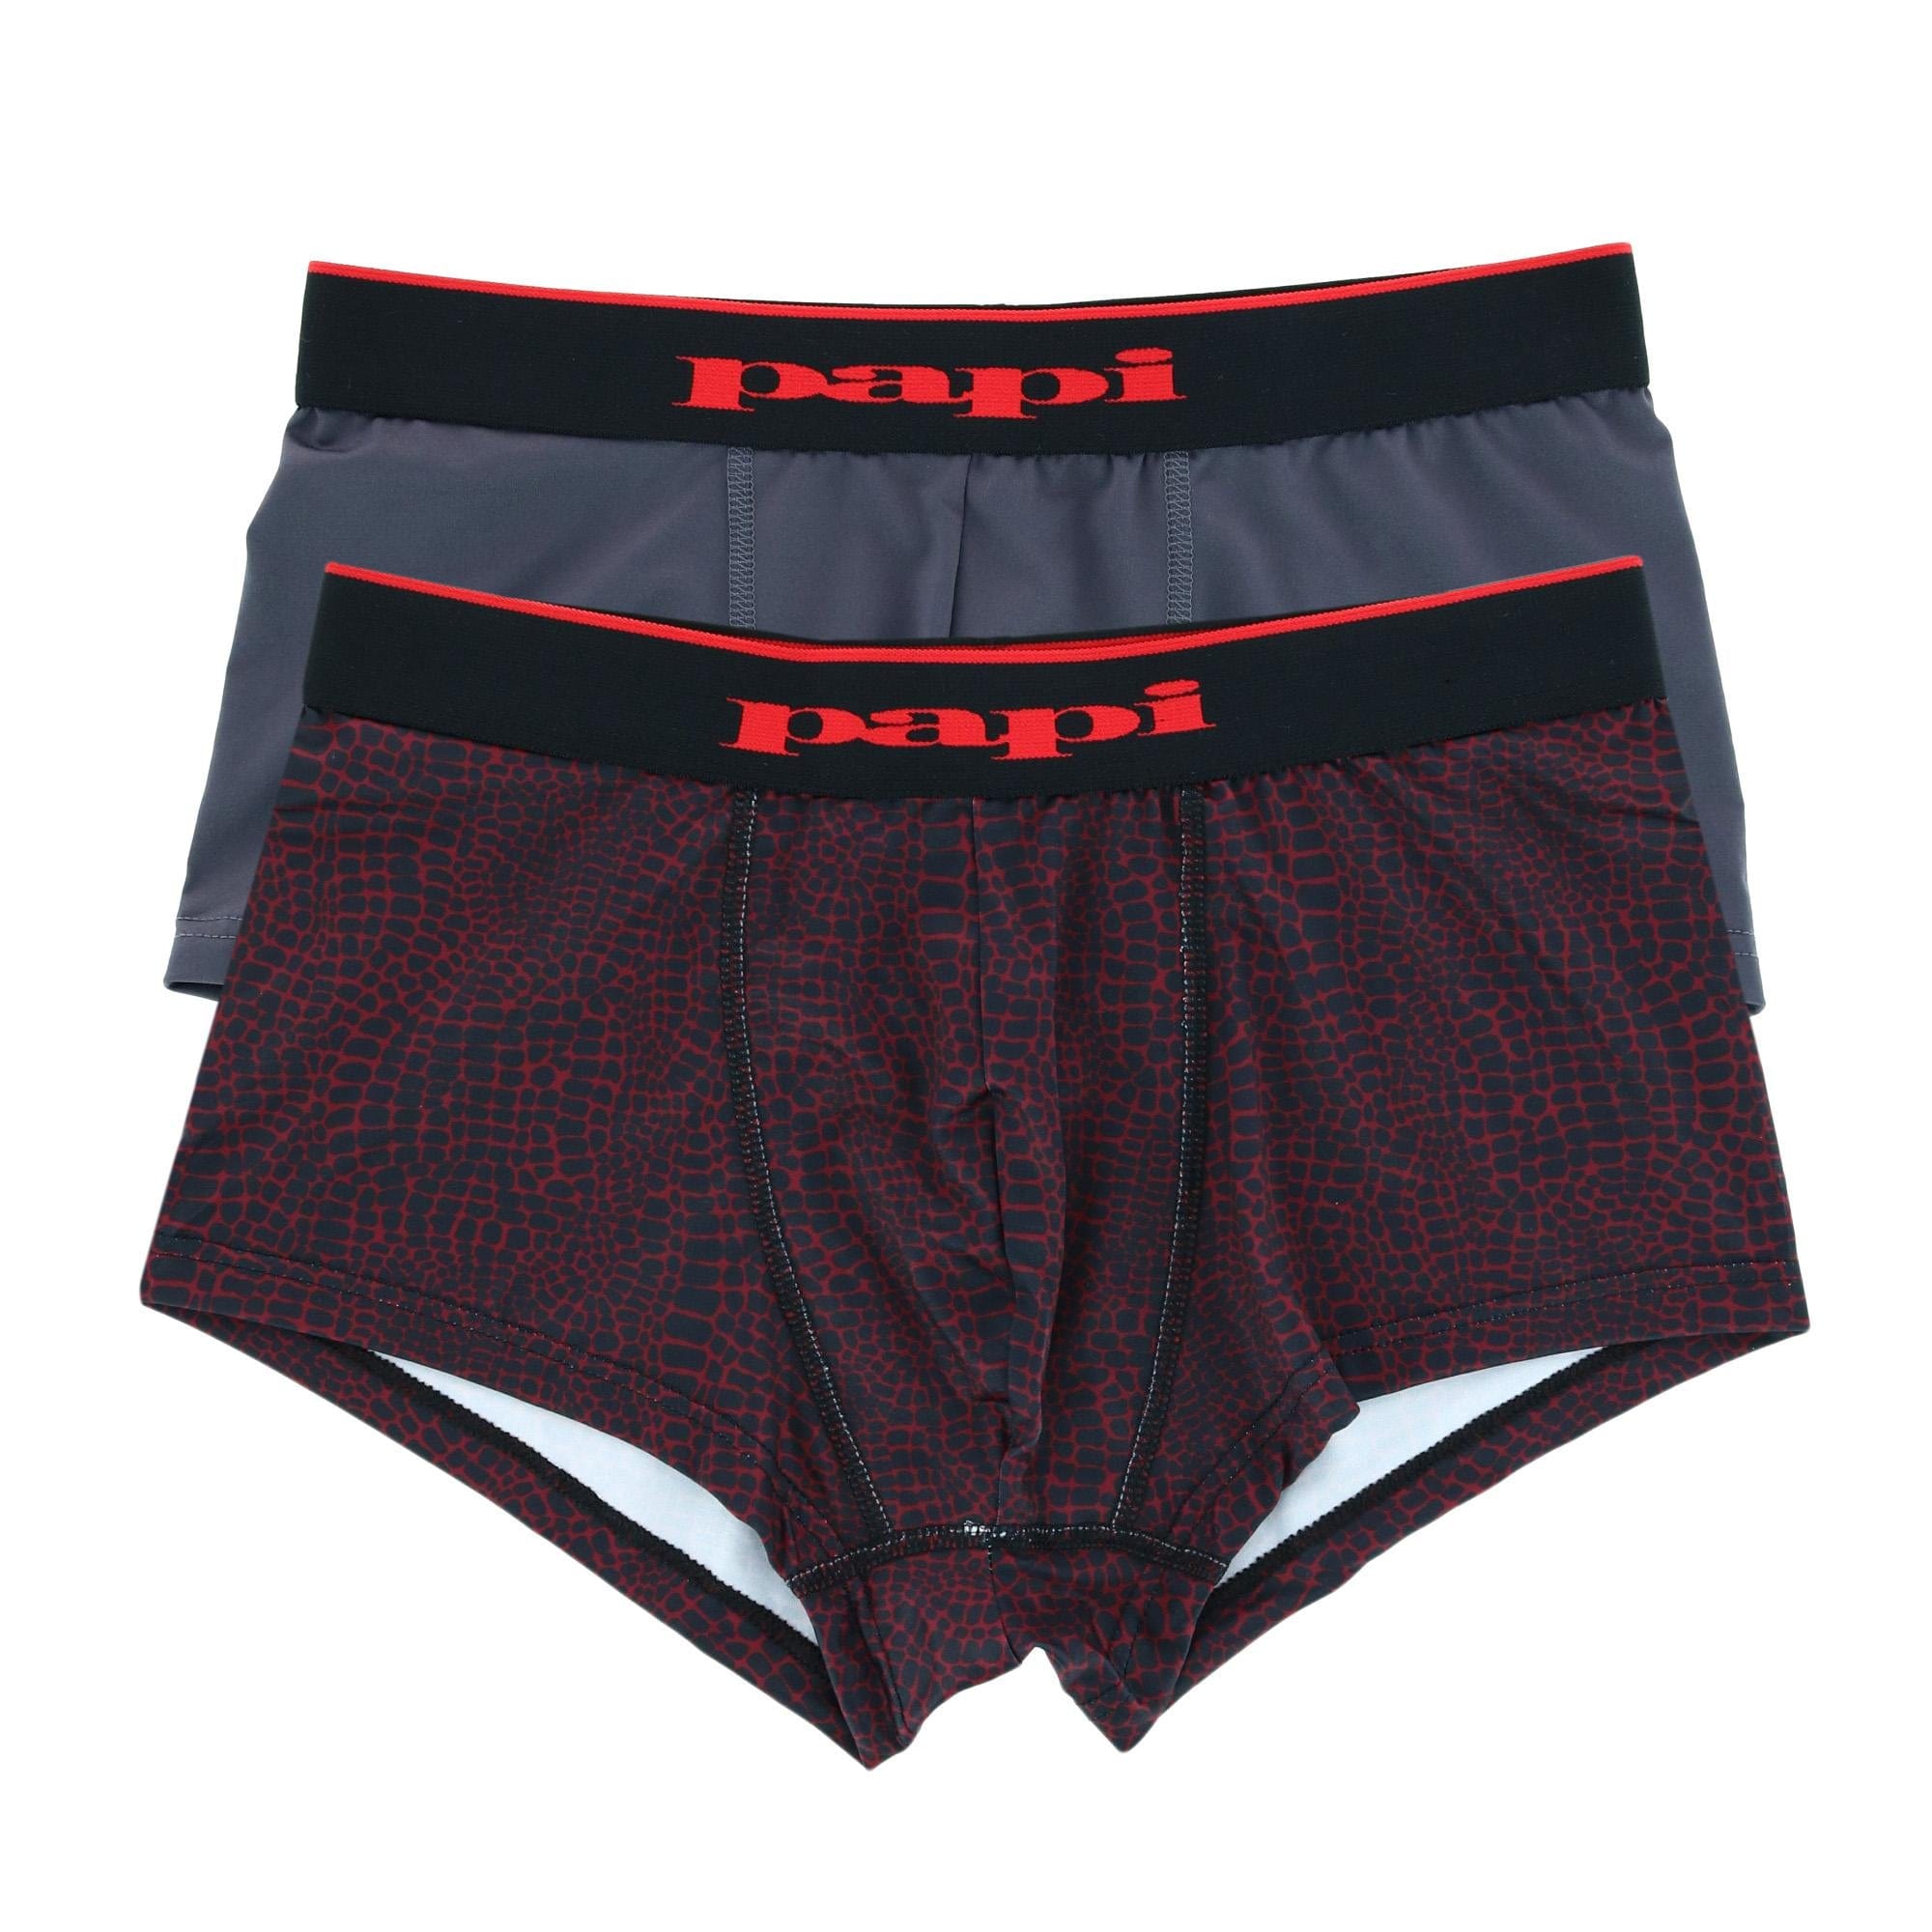 Men's Snake Print and Solid Brazilian Cut Trunks (2 Pack) by Papi